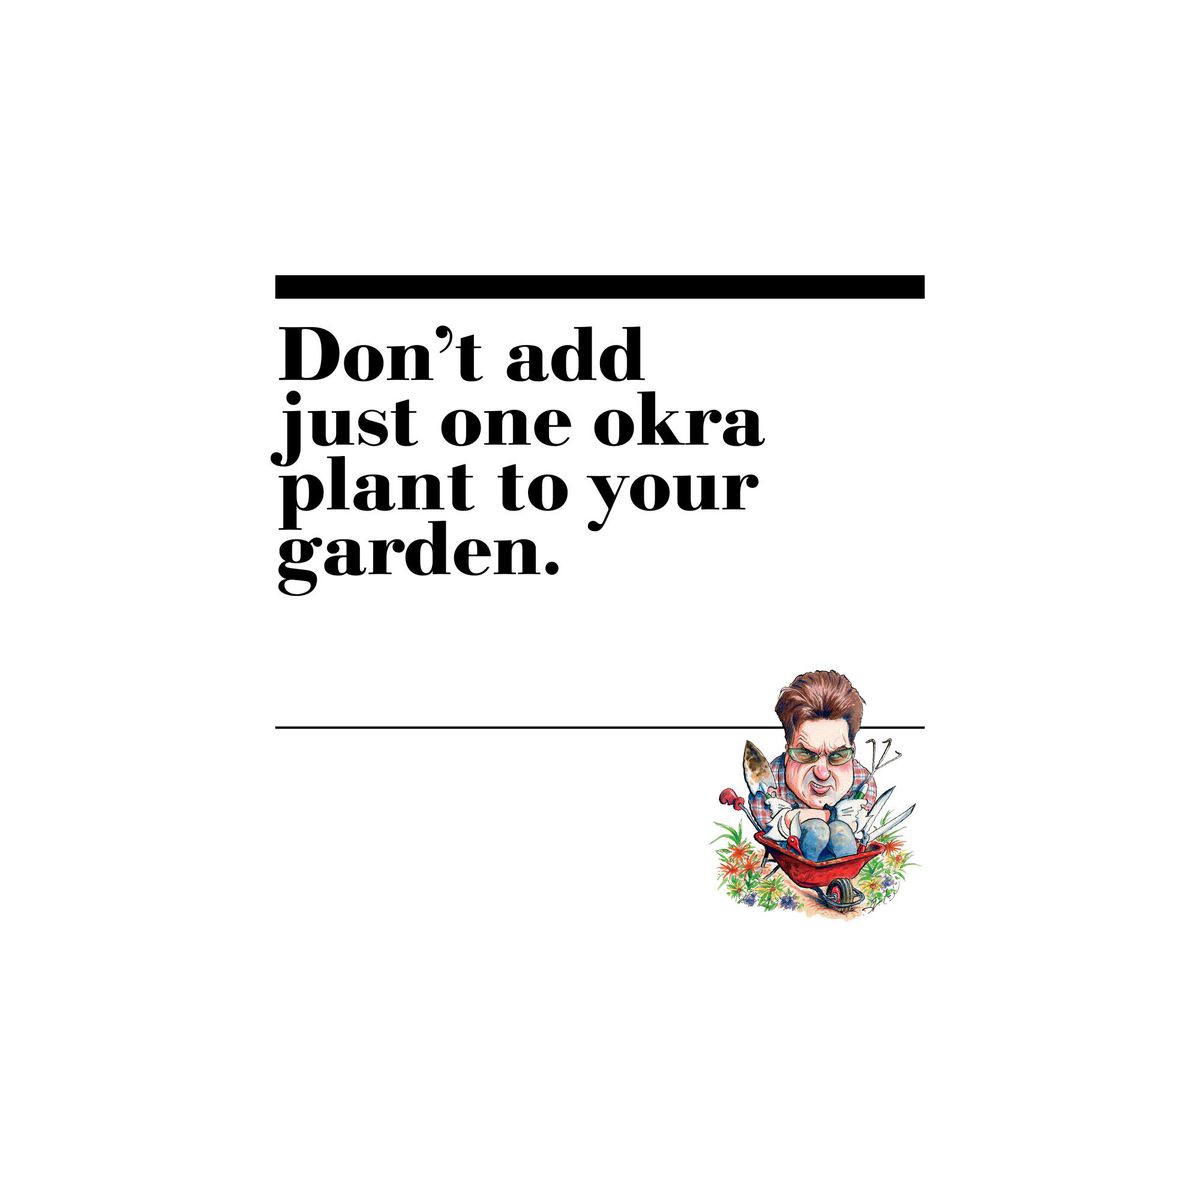 5. Don’t add just one okra plant to your garden.